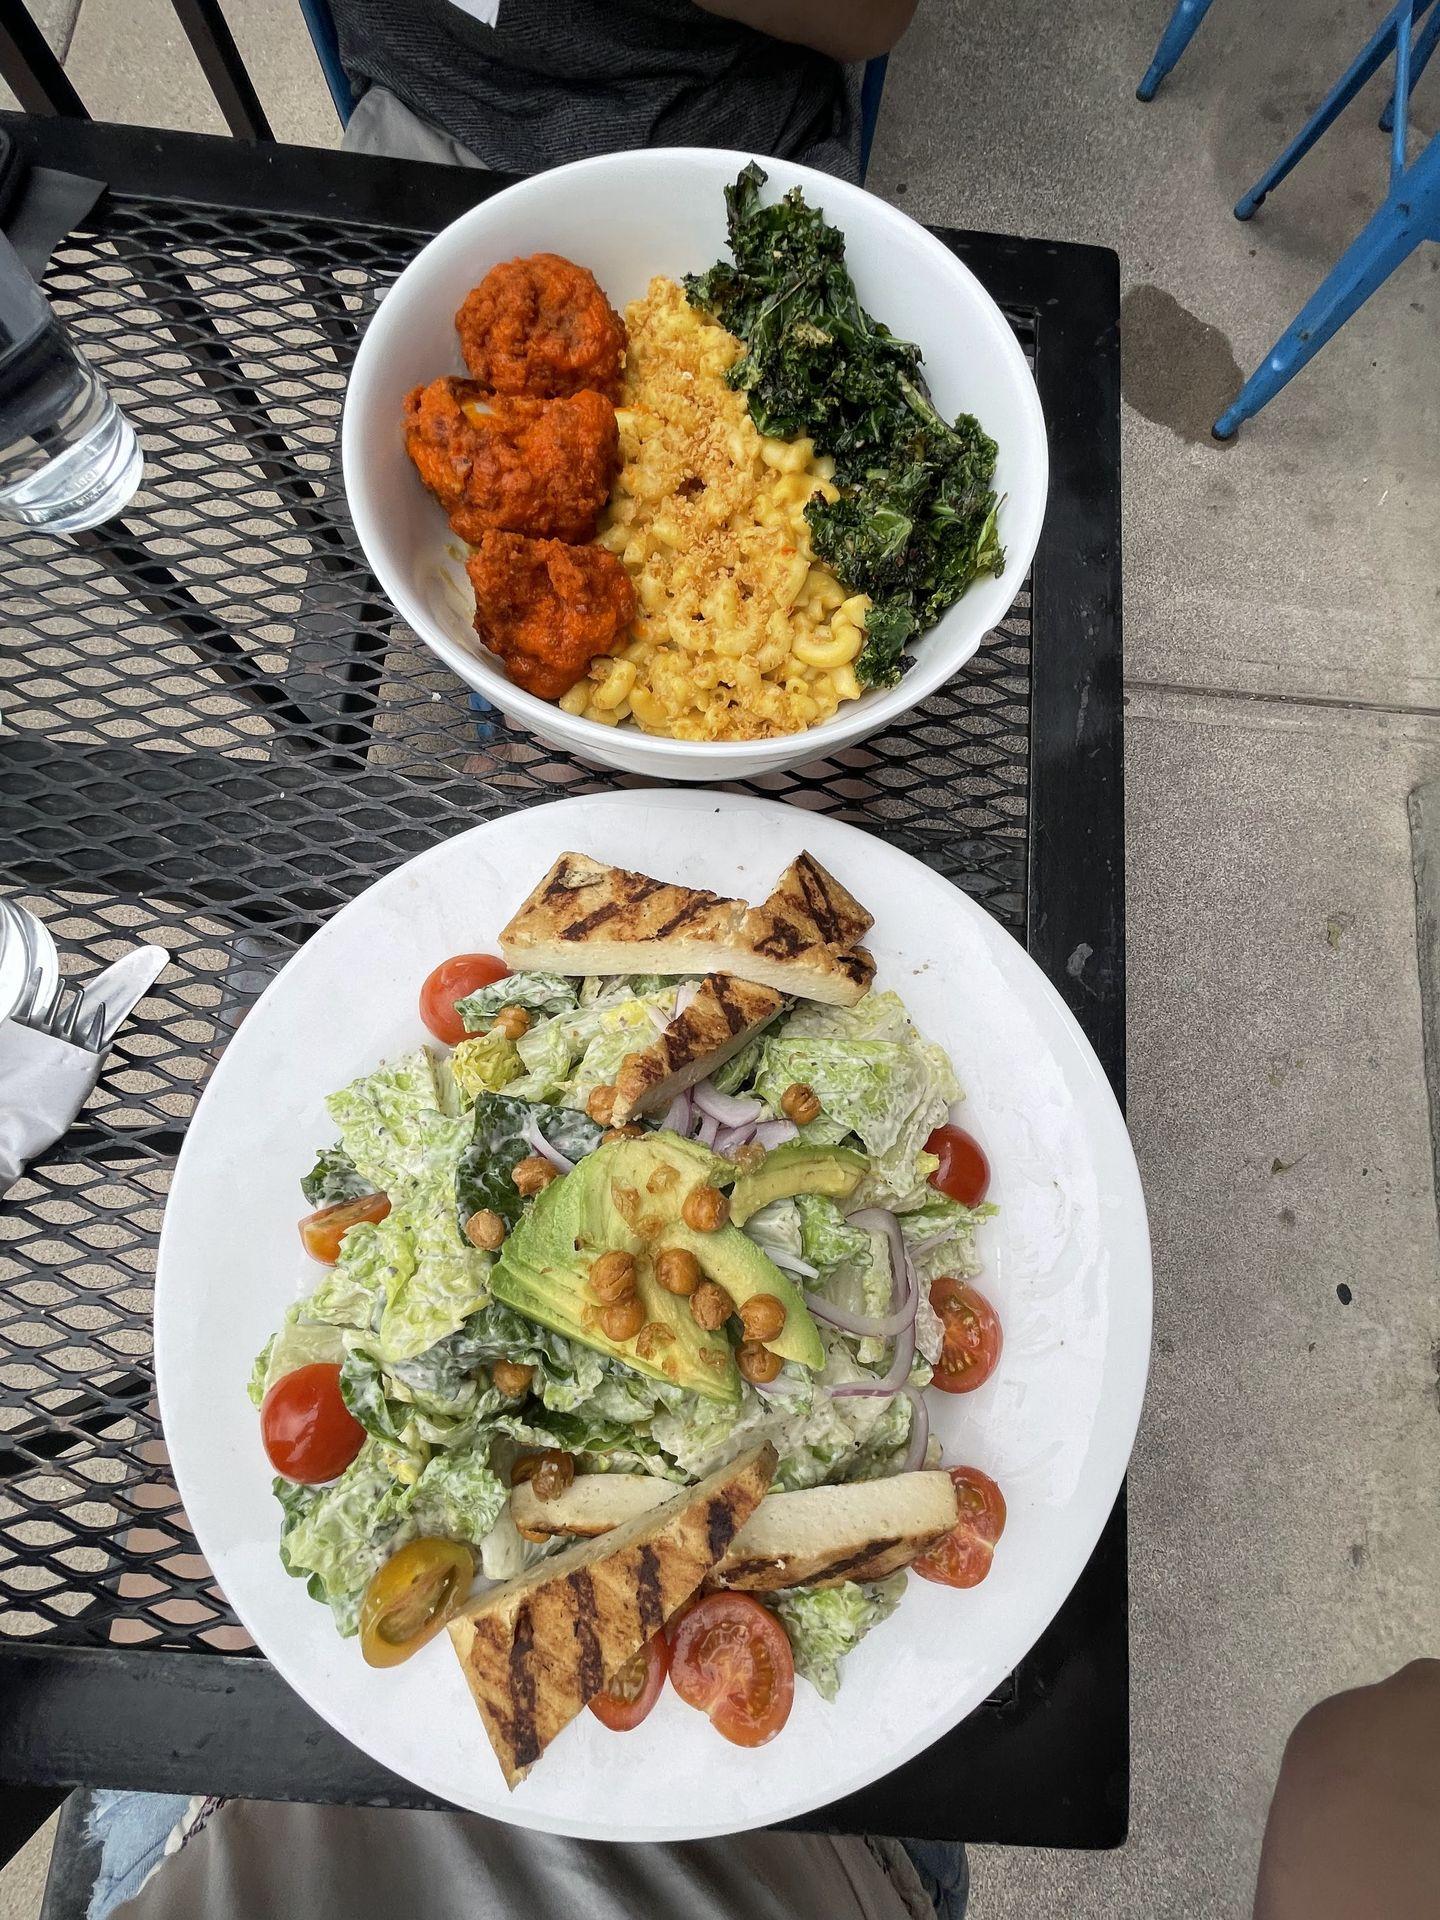 A plate of a vegan caesar salad and a plate with mac and cheese, green and buffalo faux chicken at Tasty Harmony, a vegetarian restaurant in Fort Collins.